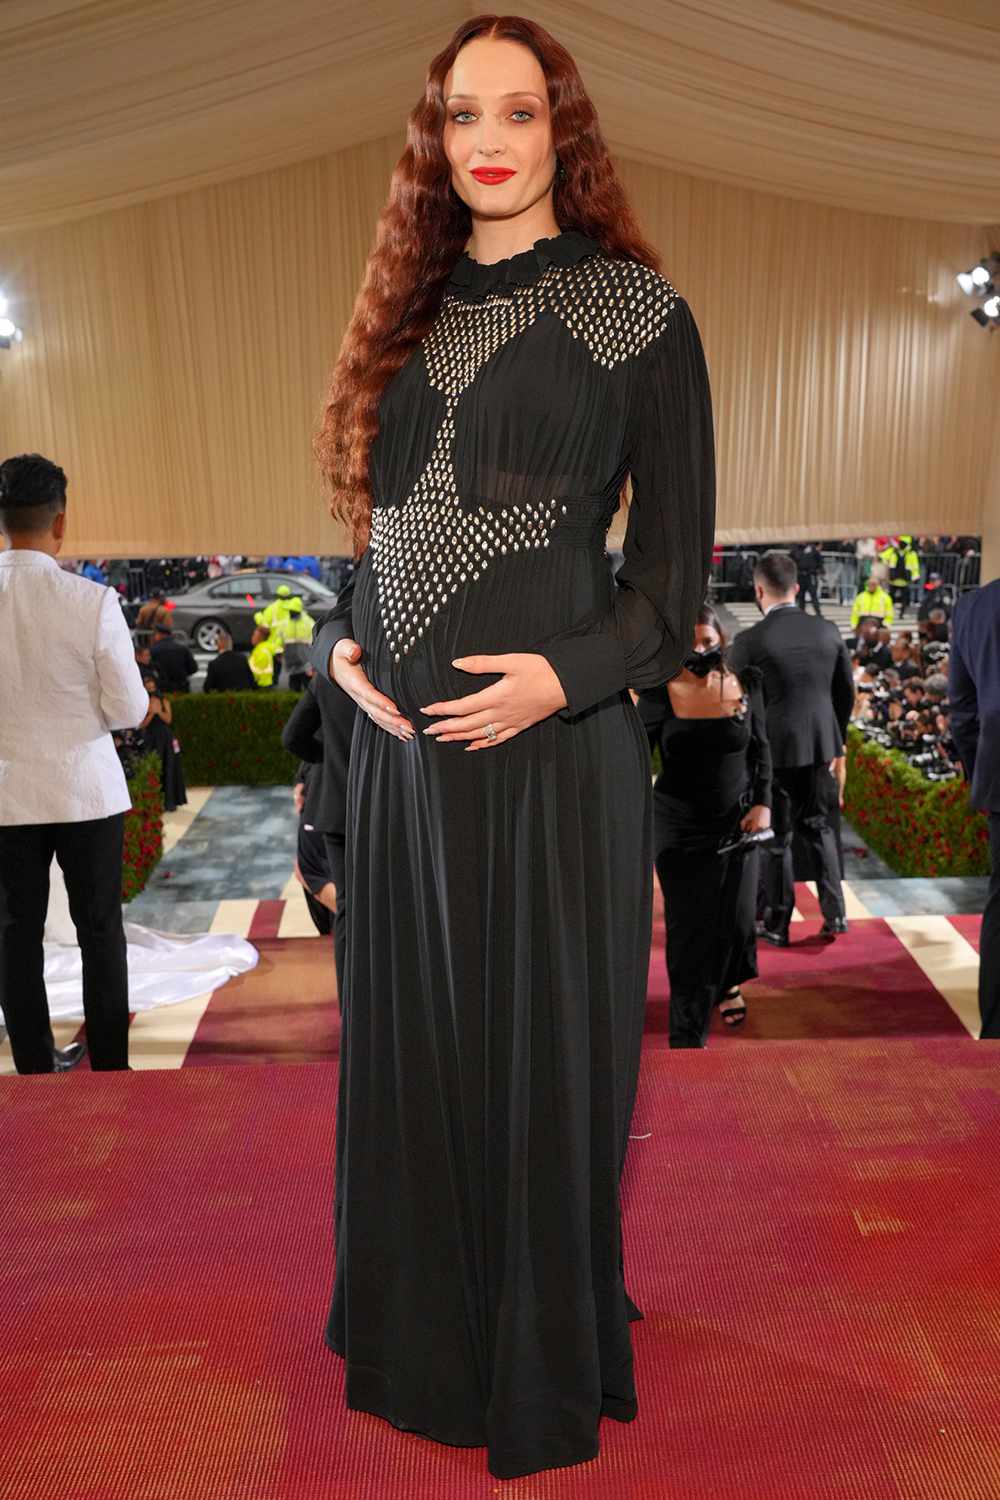 Pregnant Sophie Turner Wore High-Fashion Slides to the Met Gala: ‘She’s Wearing Flats!’